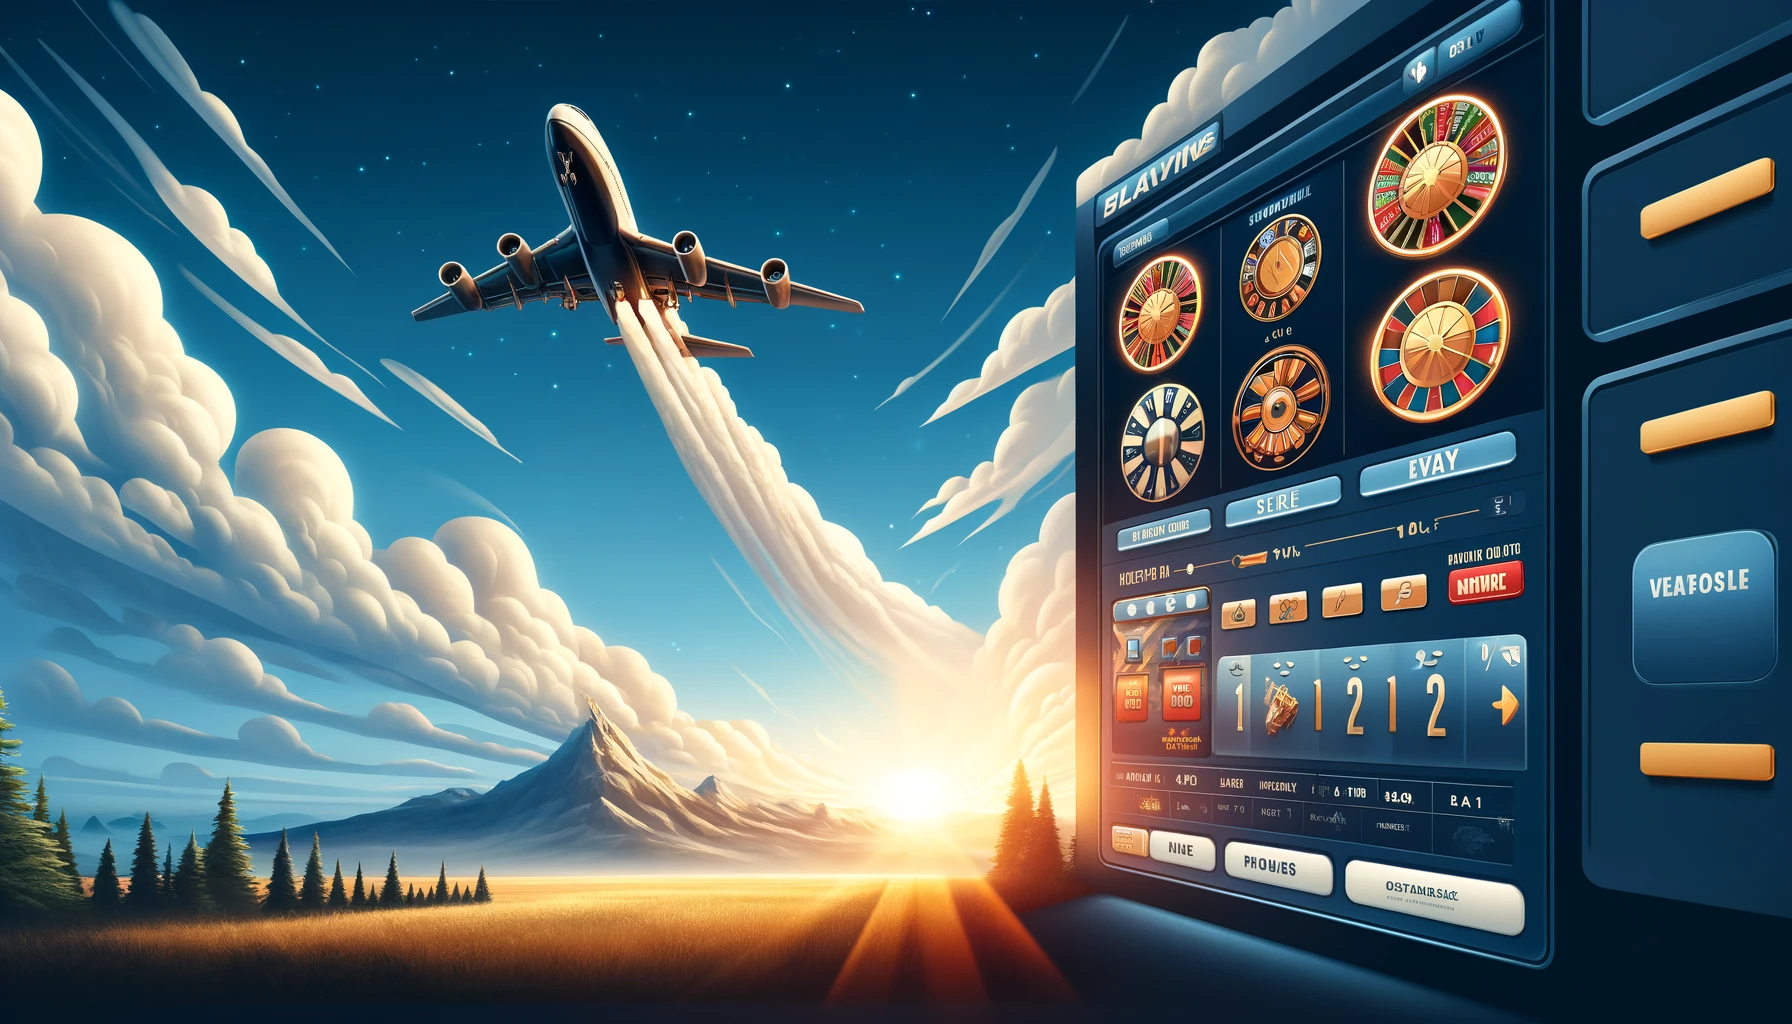 Aviator game, contrasting it with traditional slot games